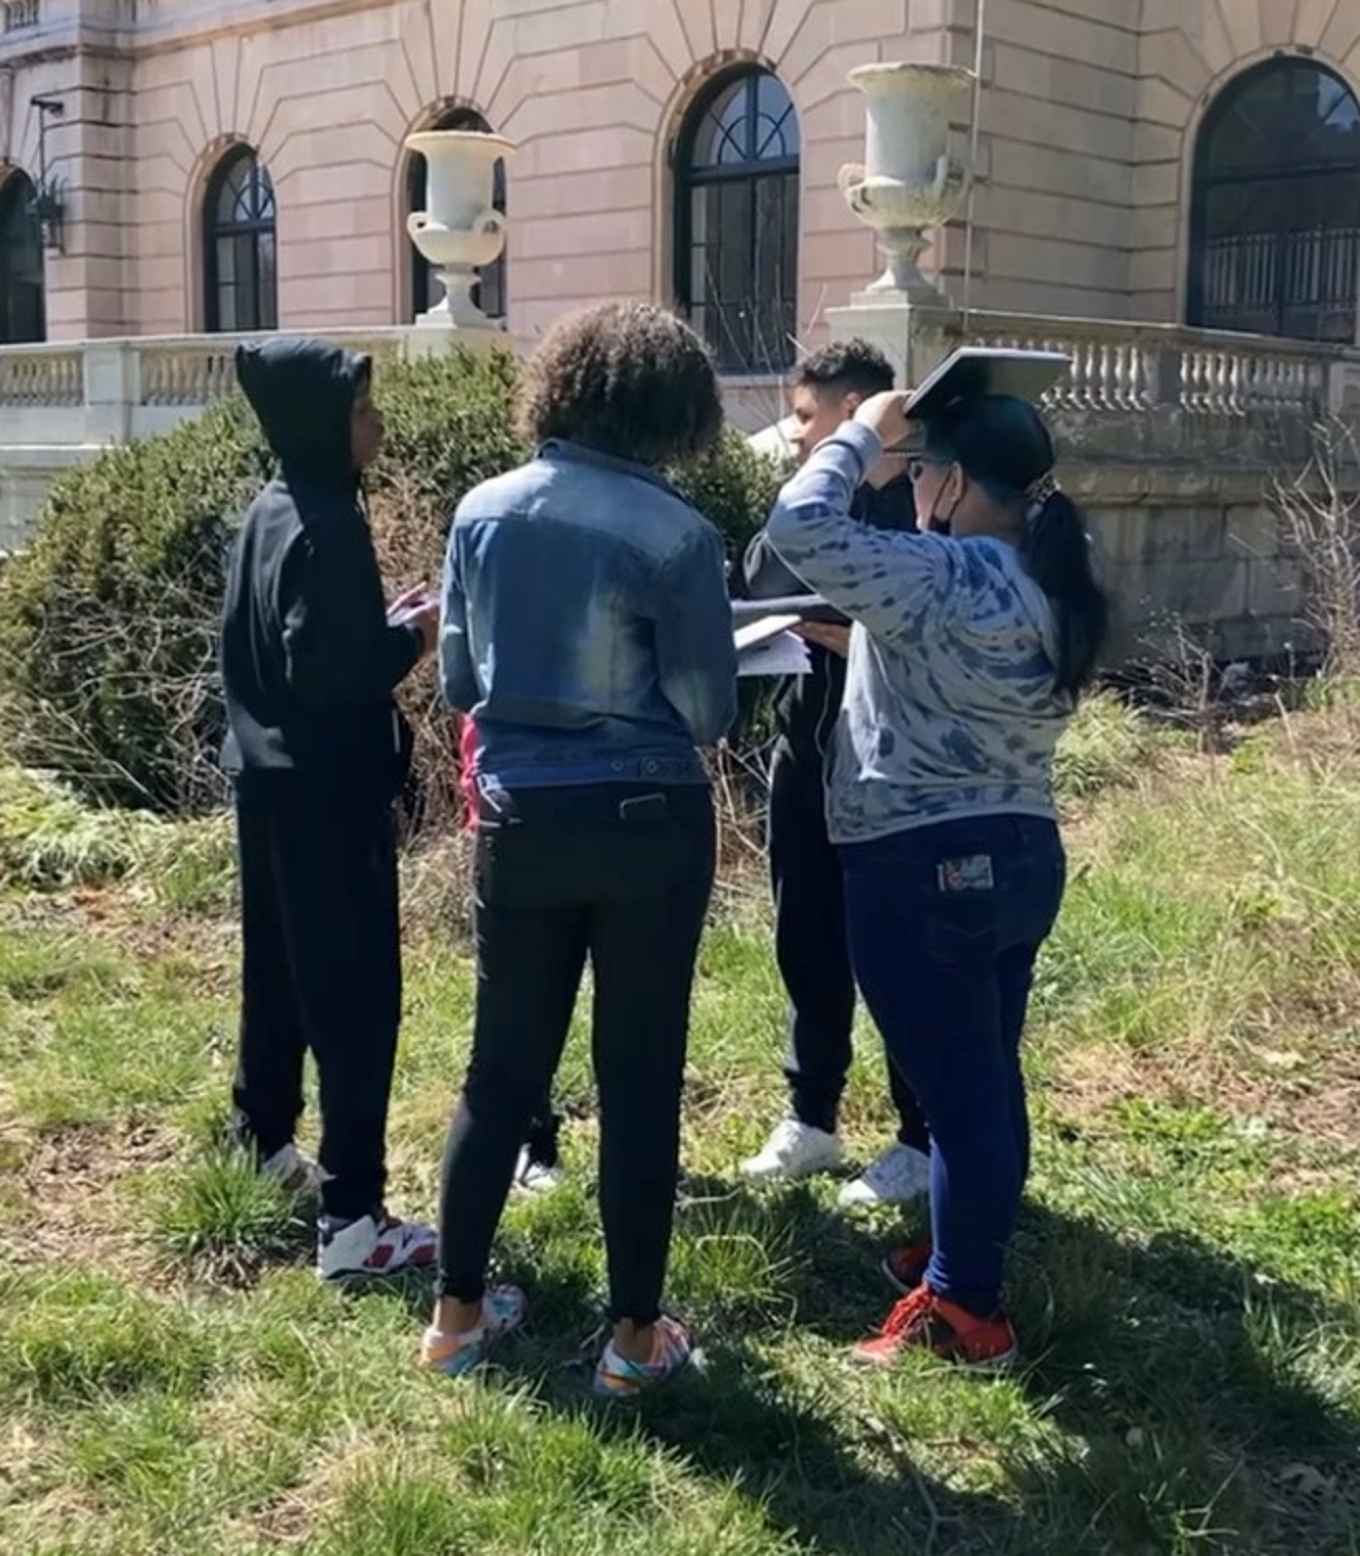 Teens are discussing their plans while standing in a small group outside on the grass